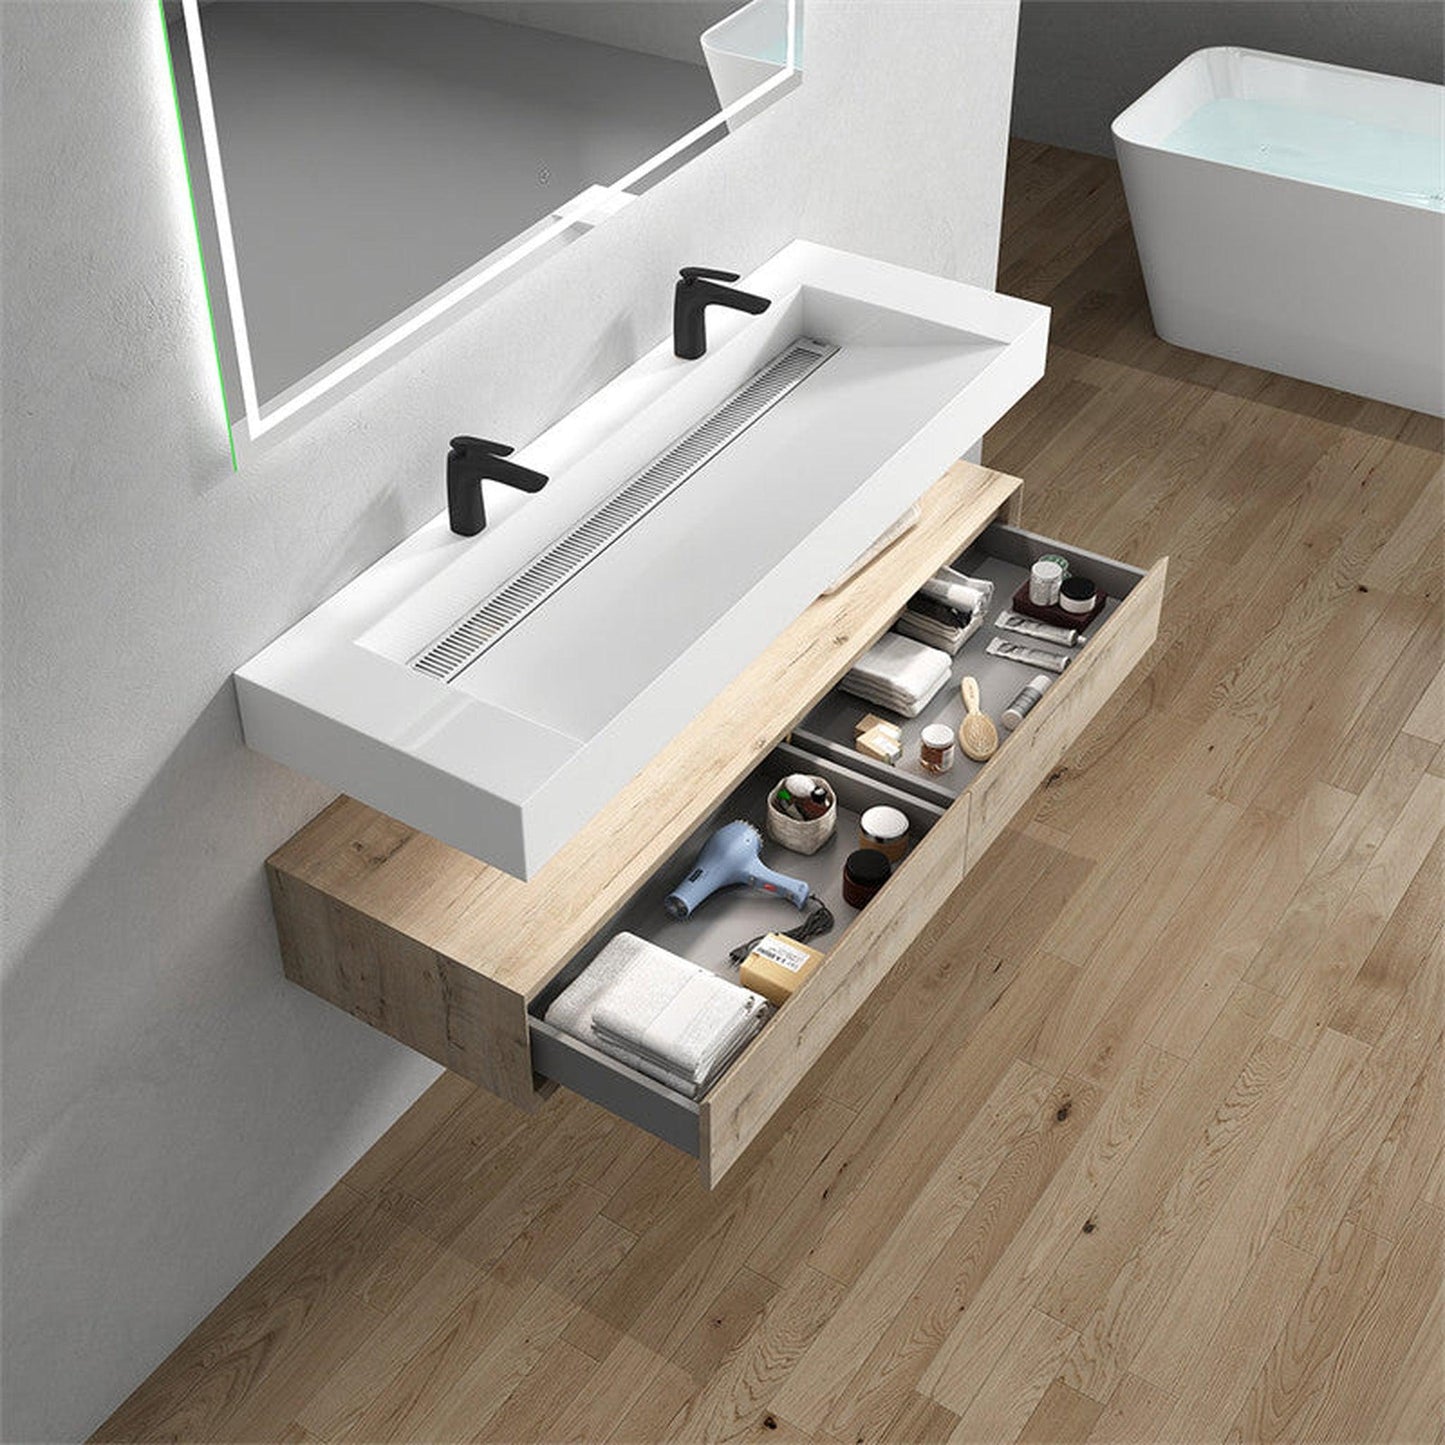 Moreno Bath ALYSA 60" Light Oak Floating Vanity With Double Faucet Holes and Reinforced White Acrylic Sink